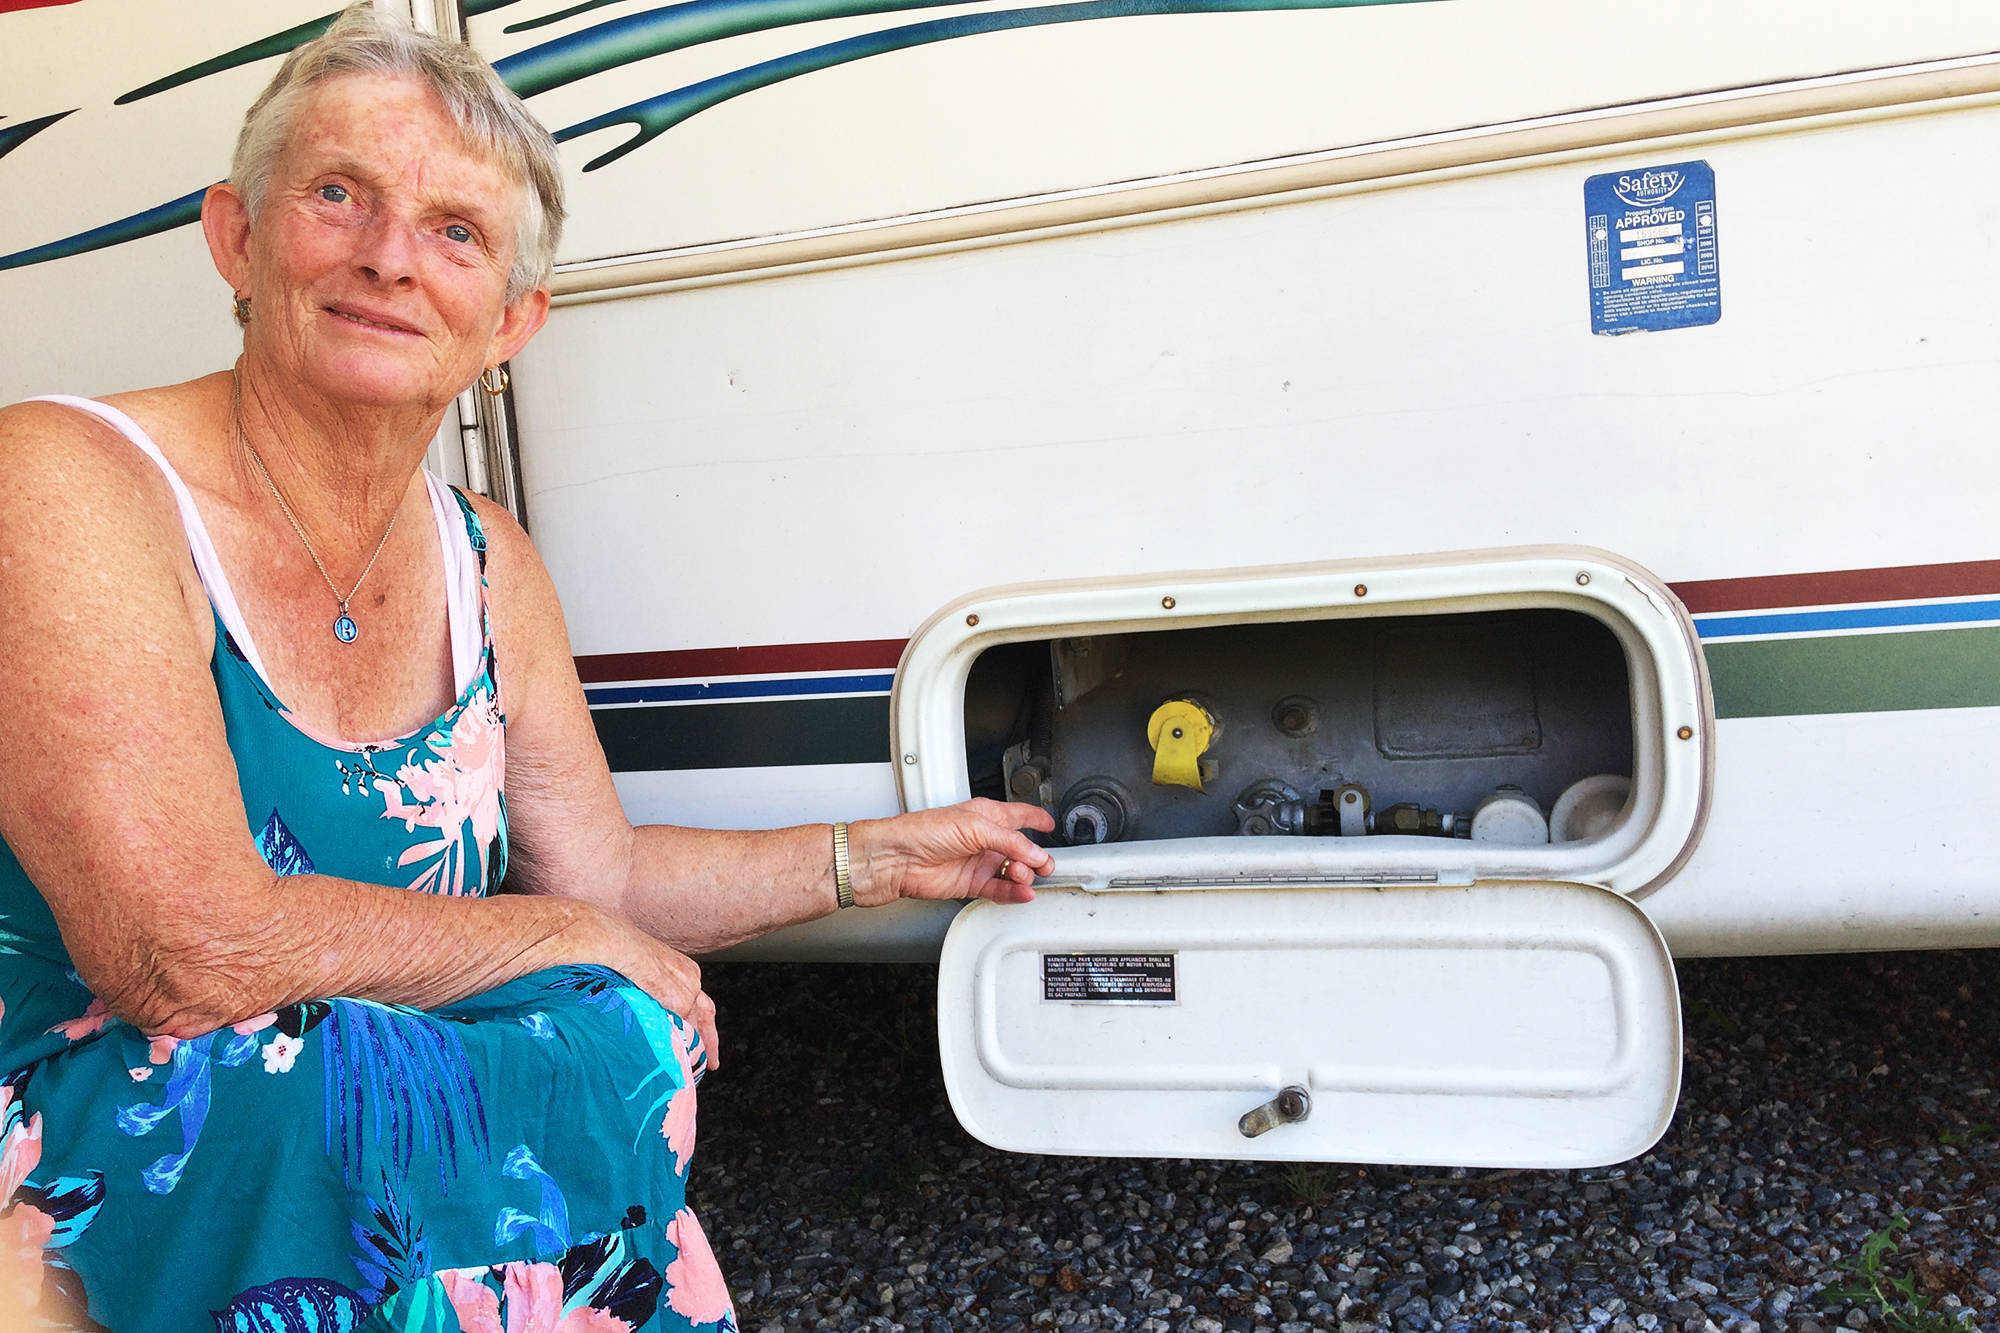 Heather Stefanek indicates the location of the propane tank on the family motorhome that an attendant at a Kamloops gas station dangerously overfilled by 50 per cent. (Photo contributed)